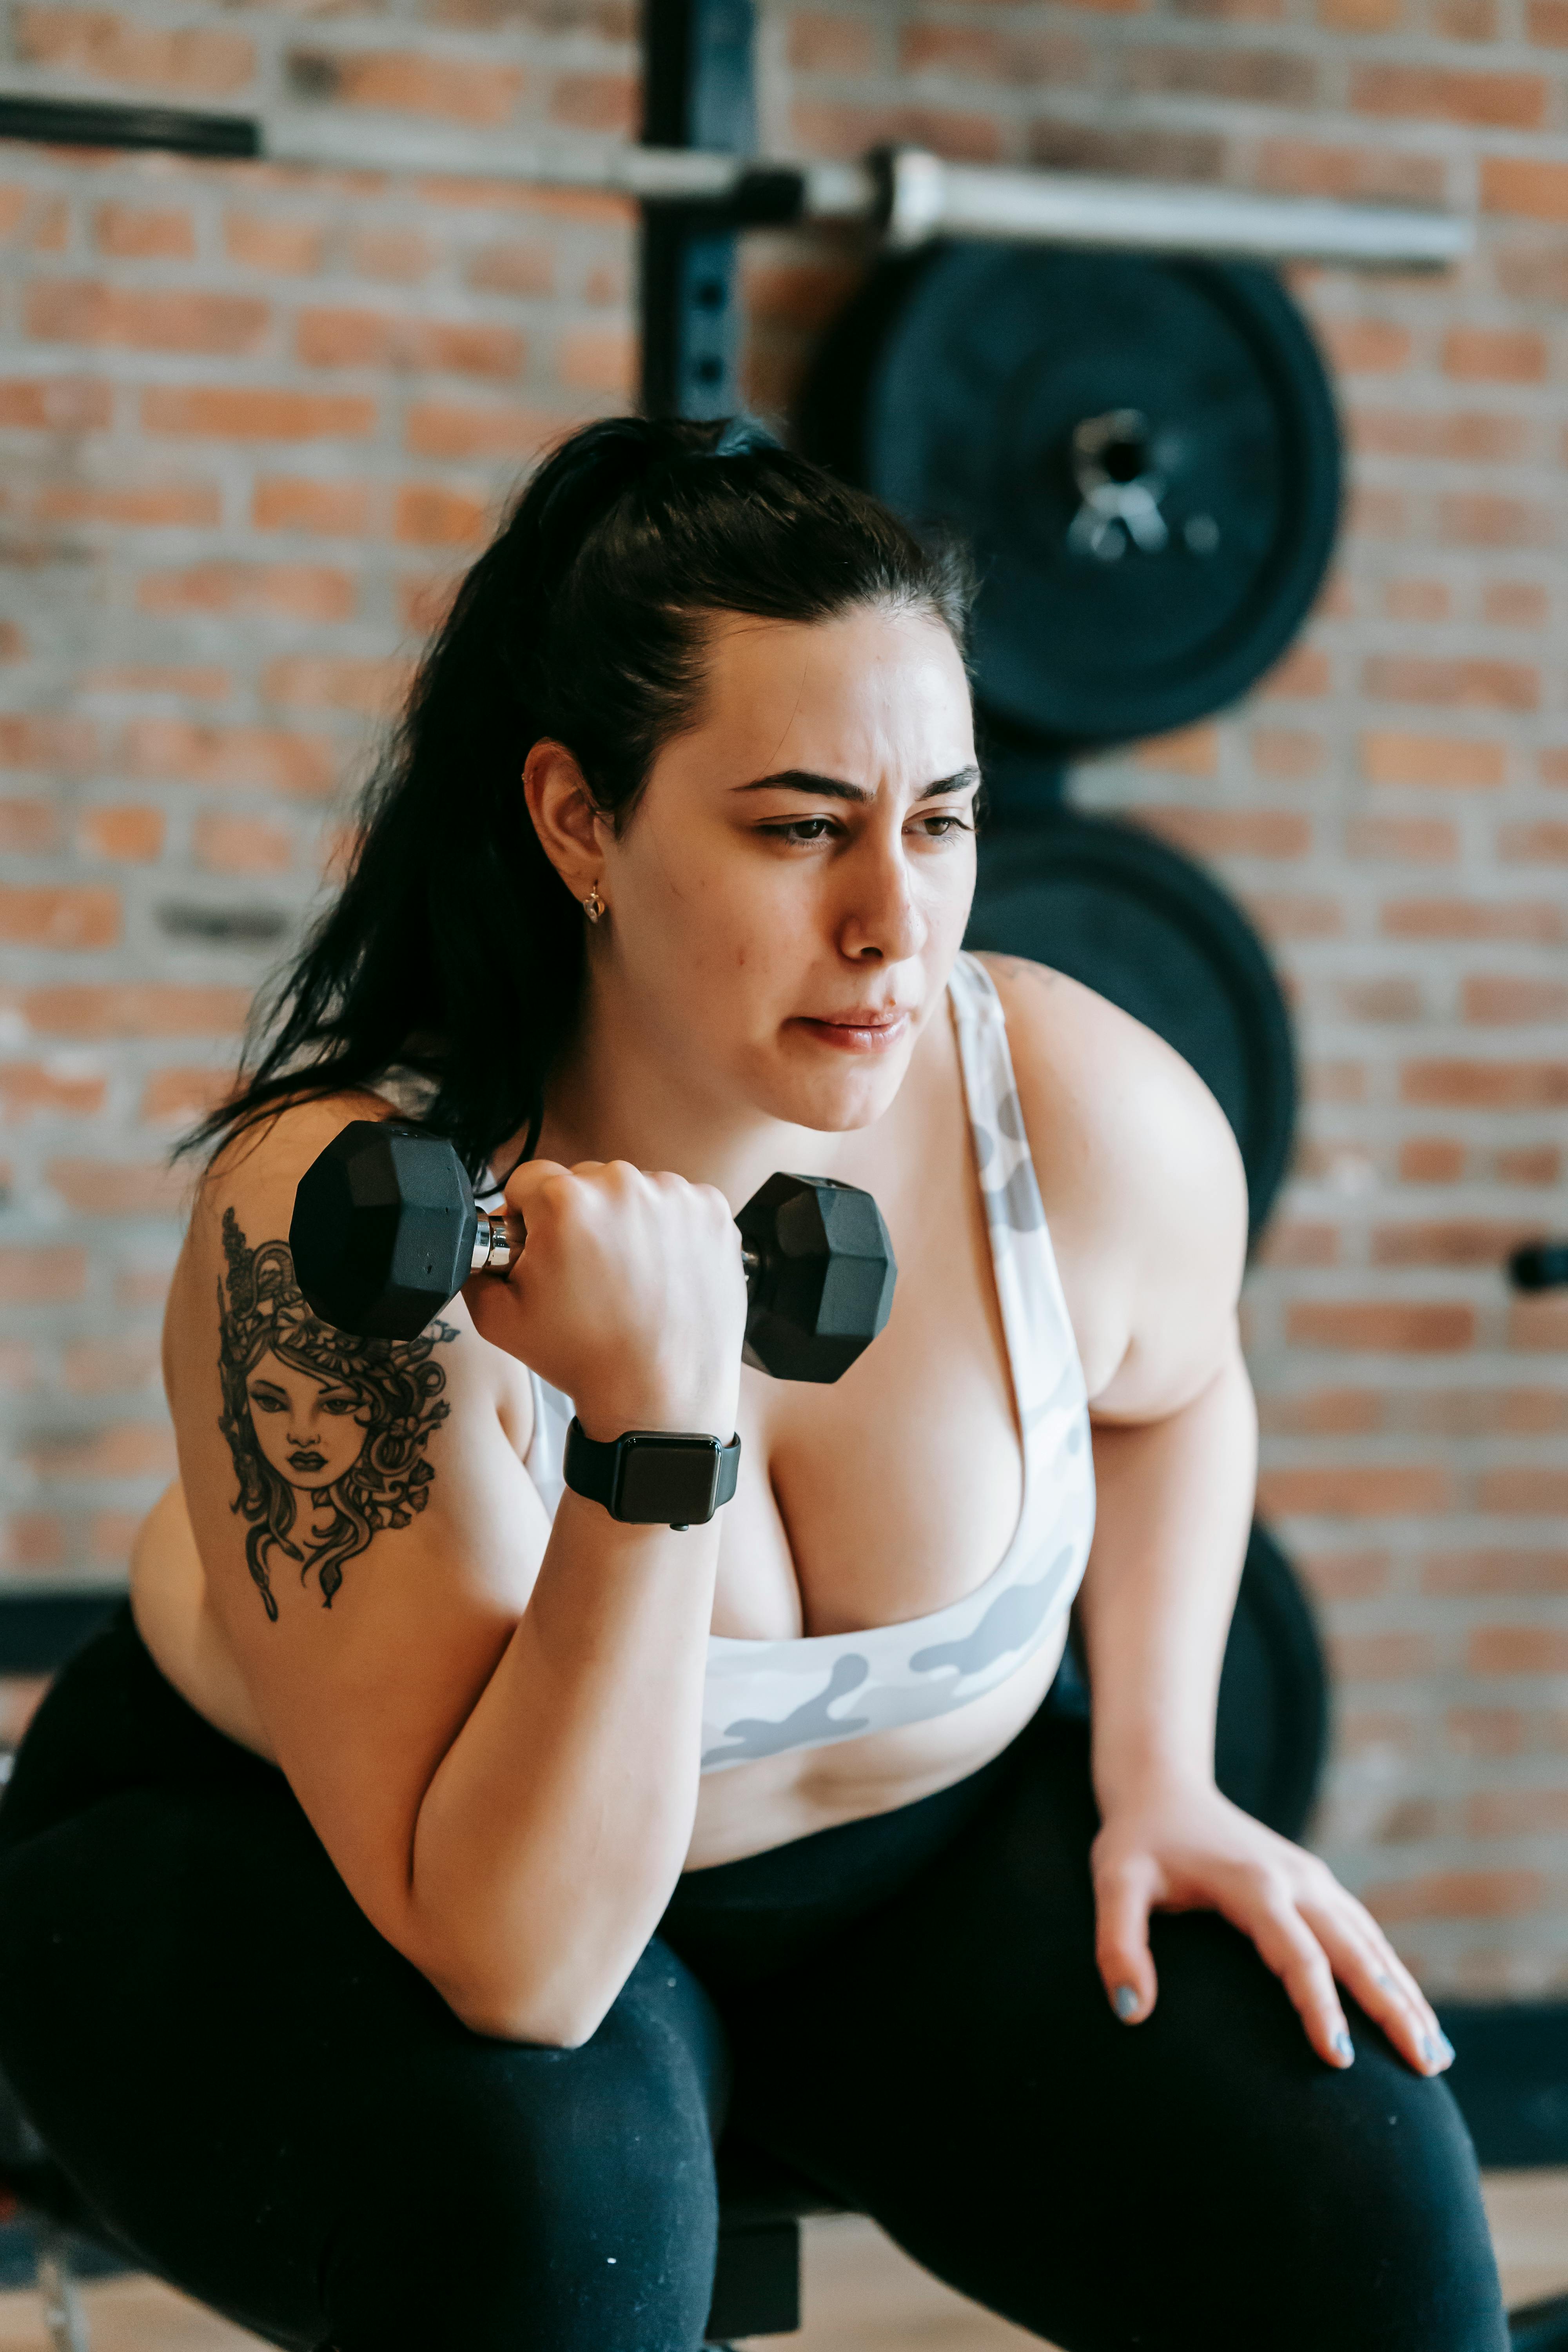 A woman working out | Source: Pexels